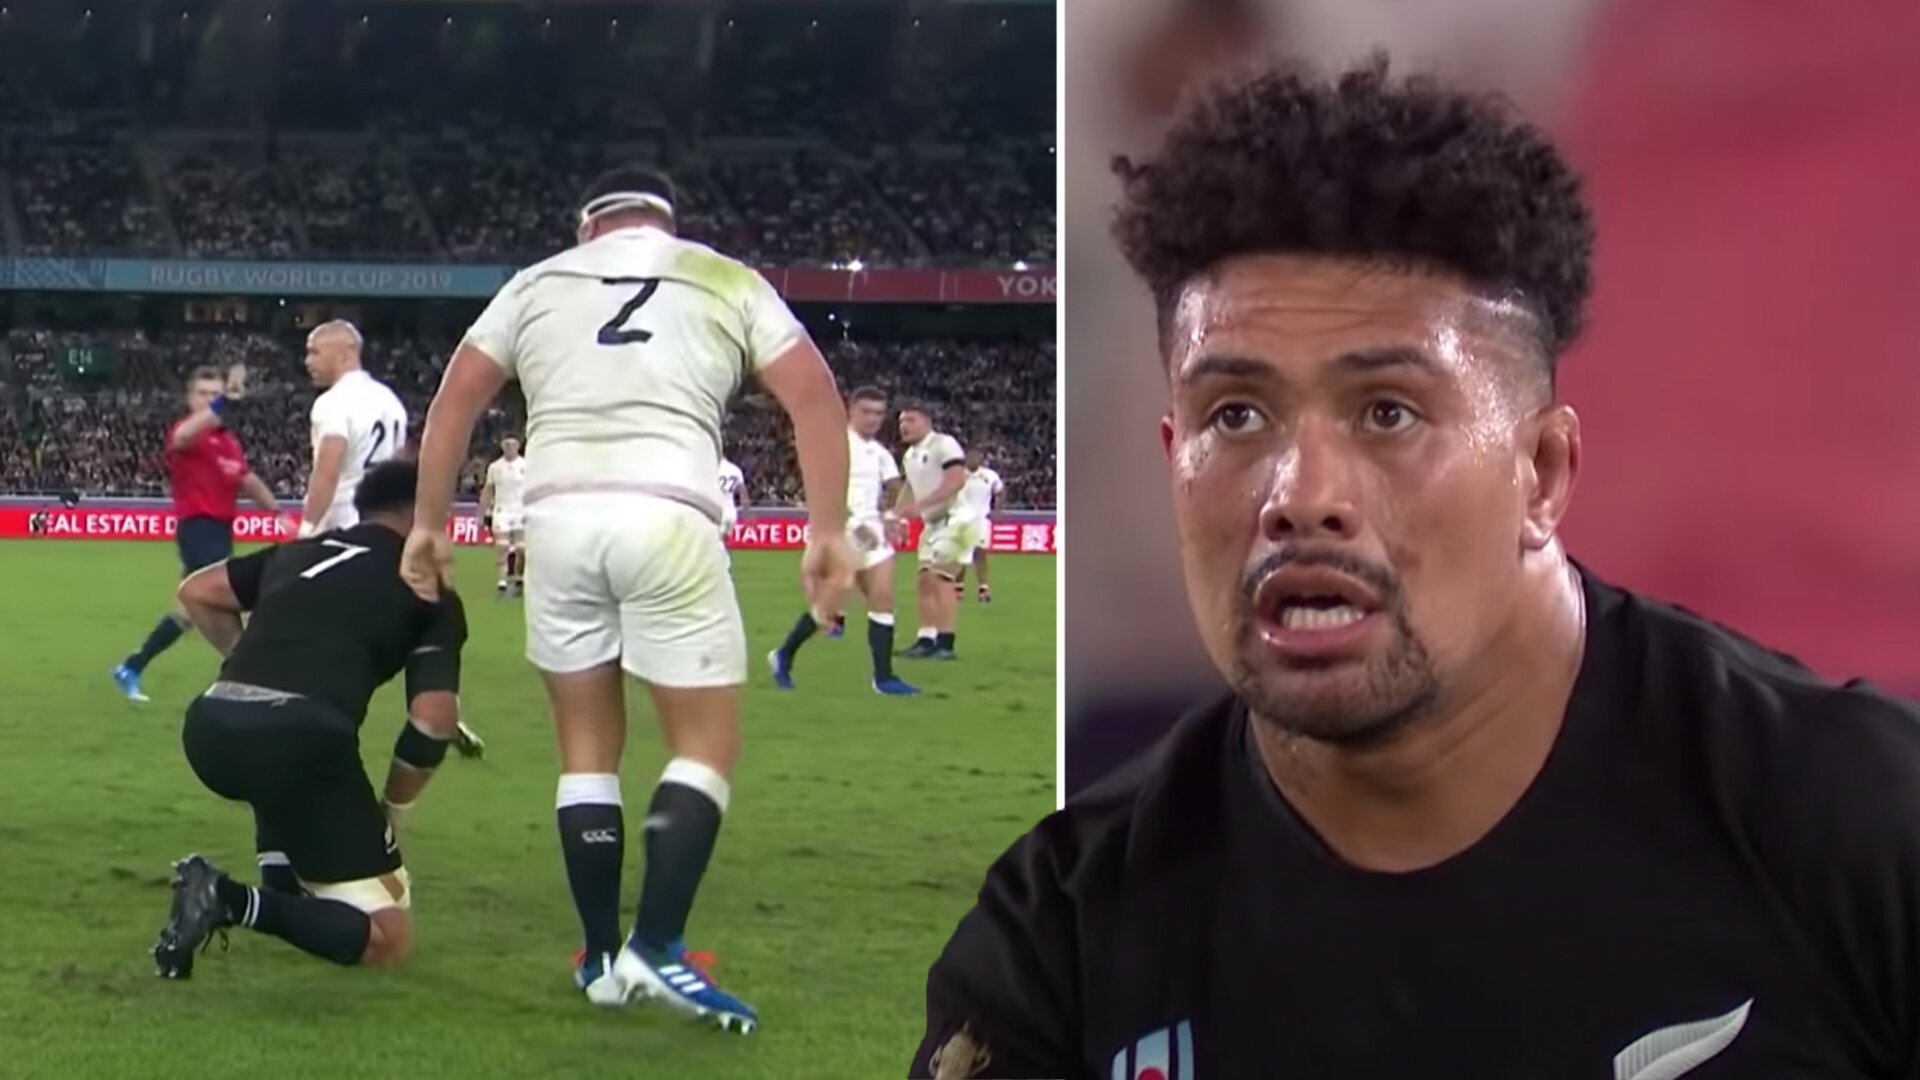 Rugby fans are suddenly talking about the weird thing that Ardie Savea did to Jamie George at the World Cup